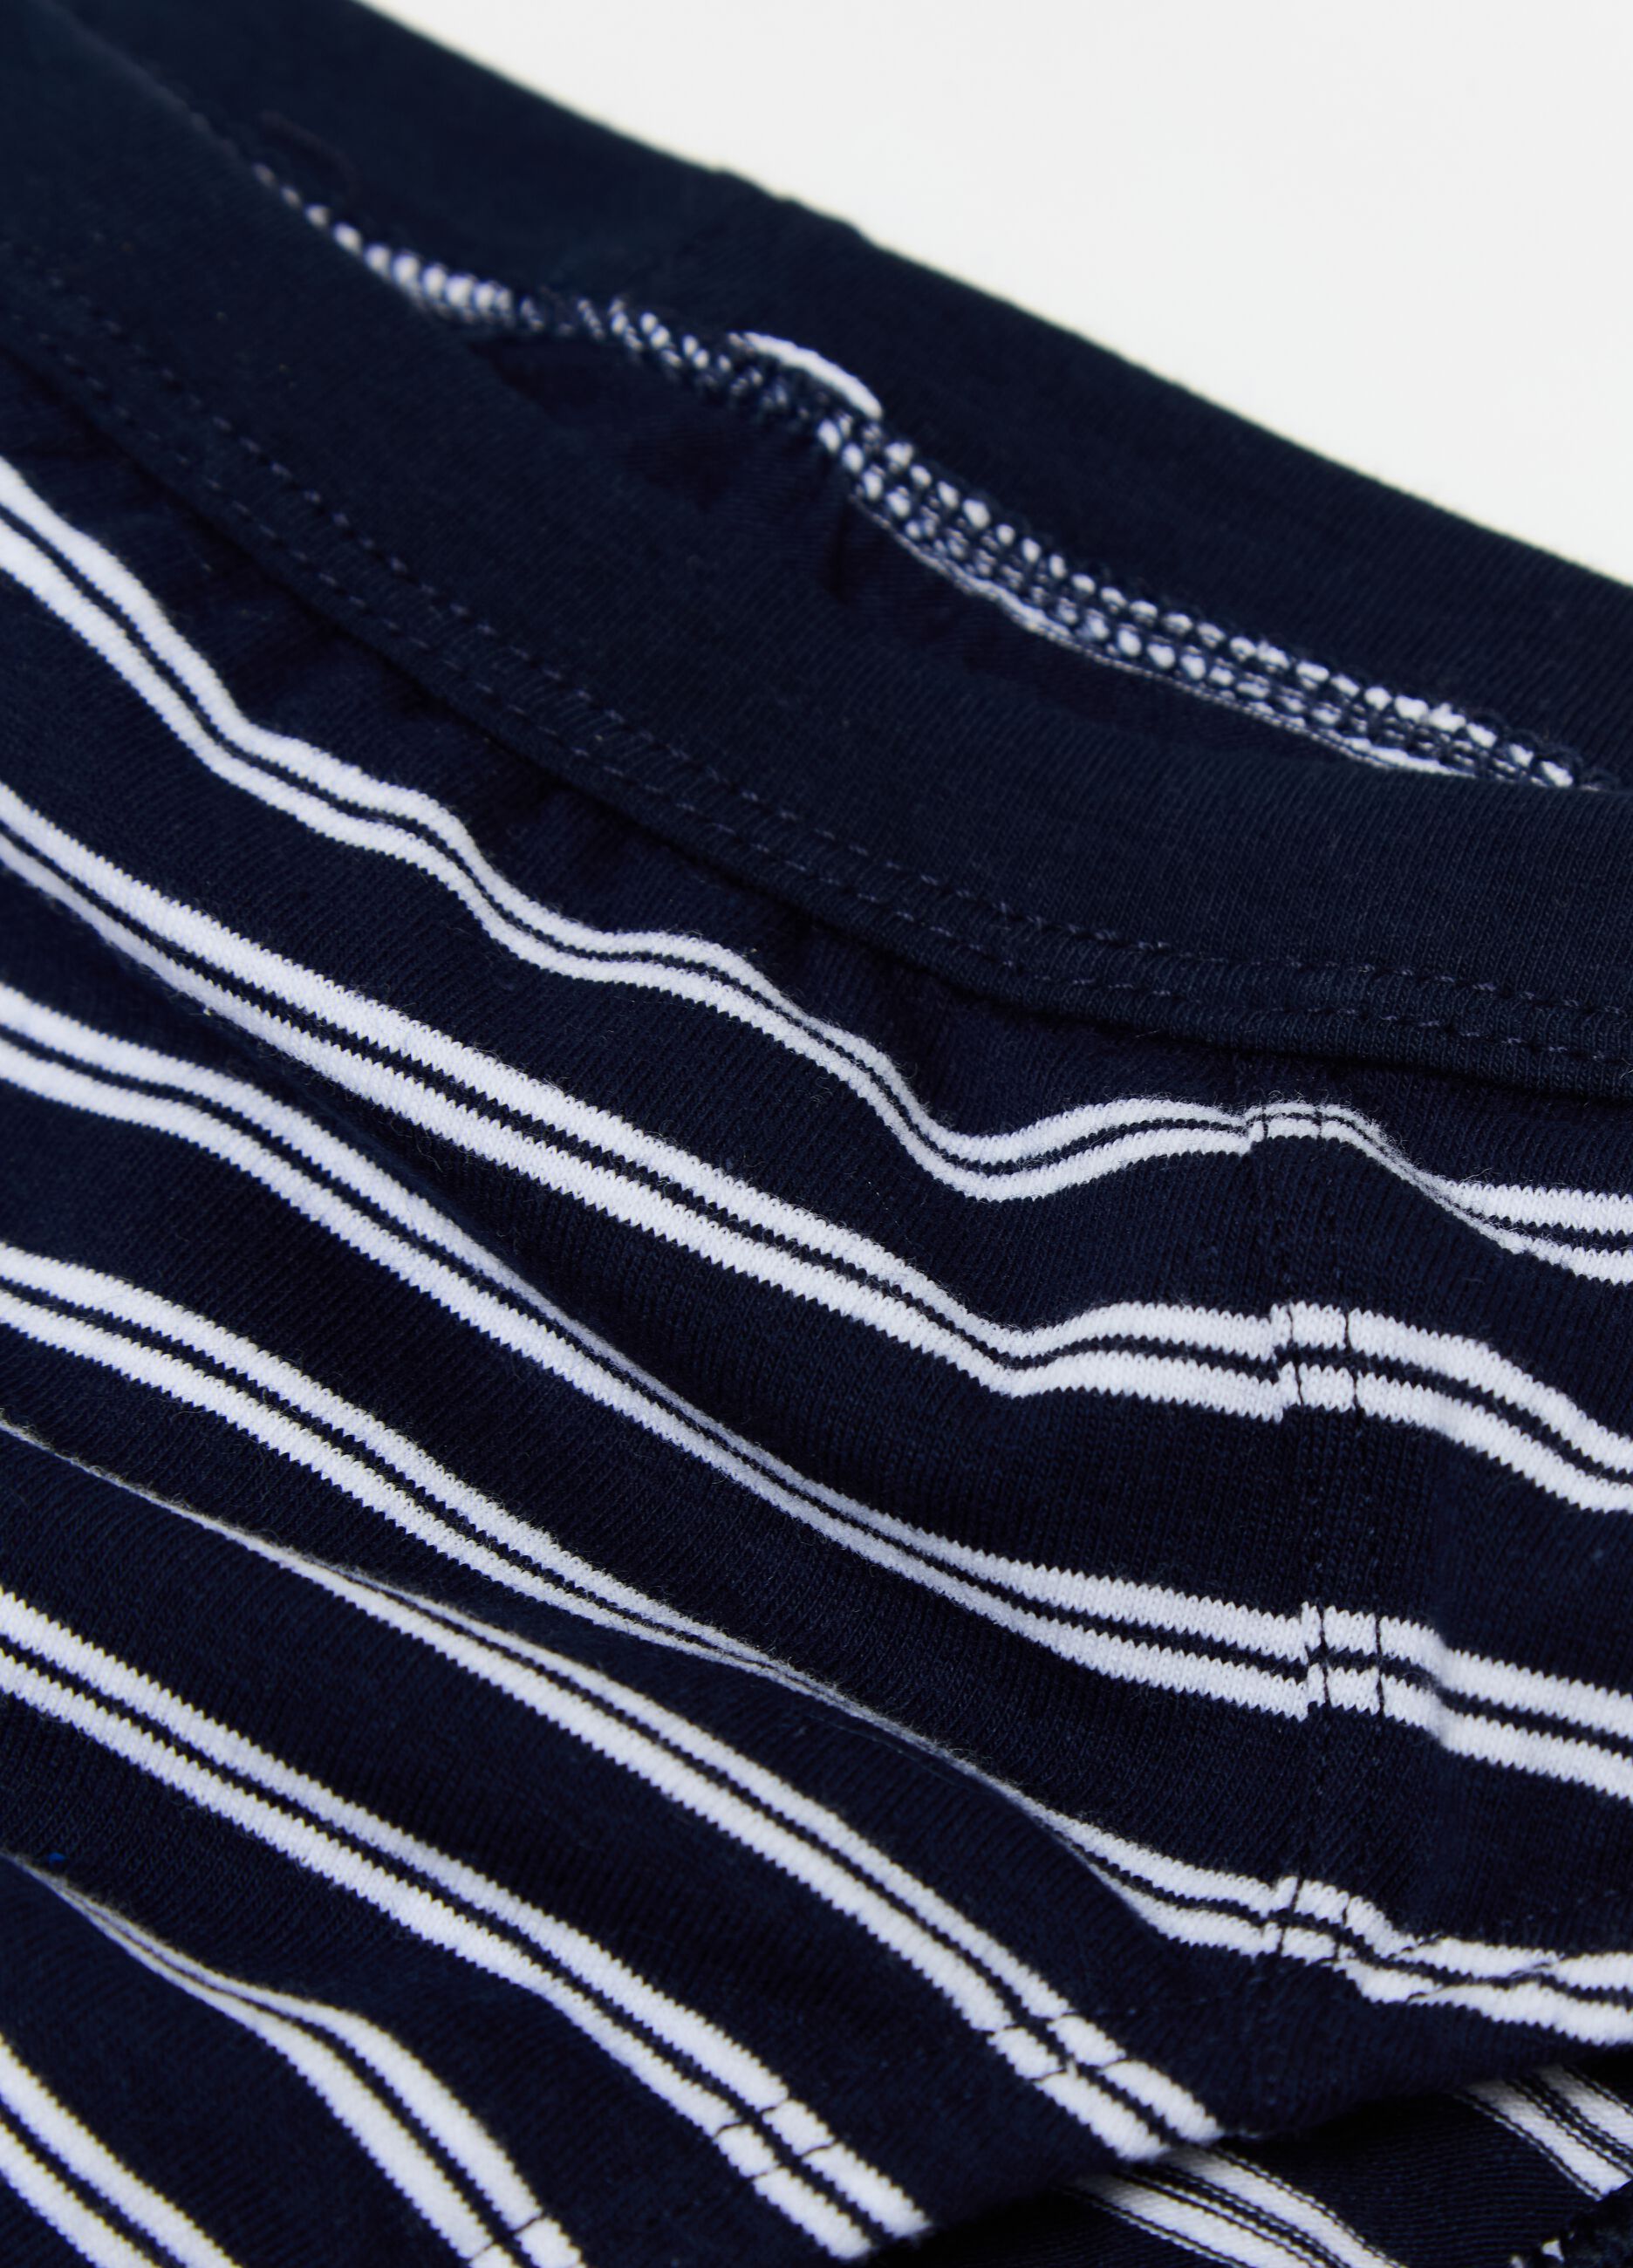 Organic cotton briefs with striped pattern